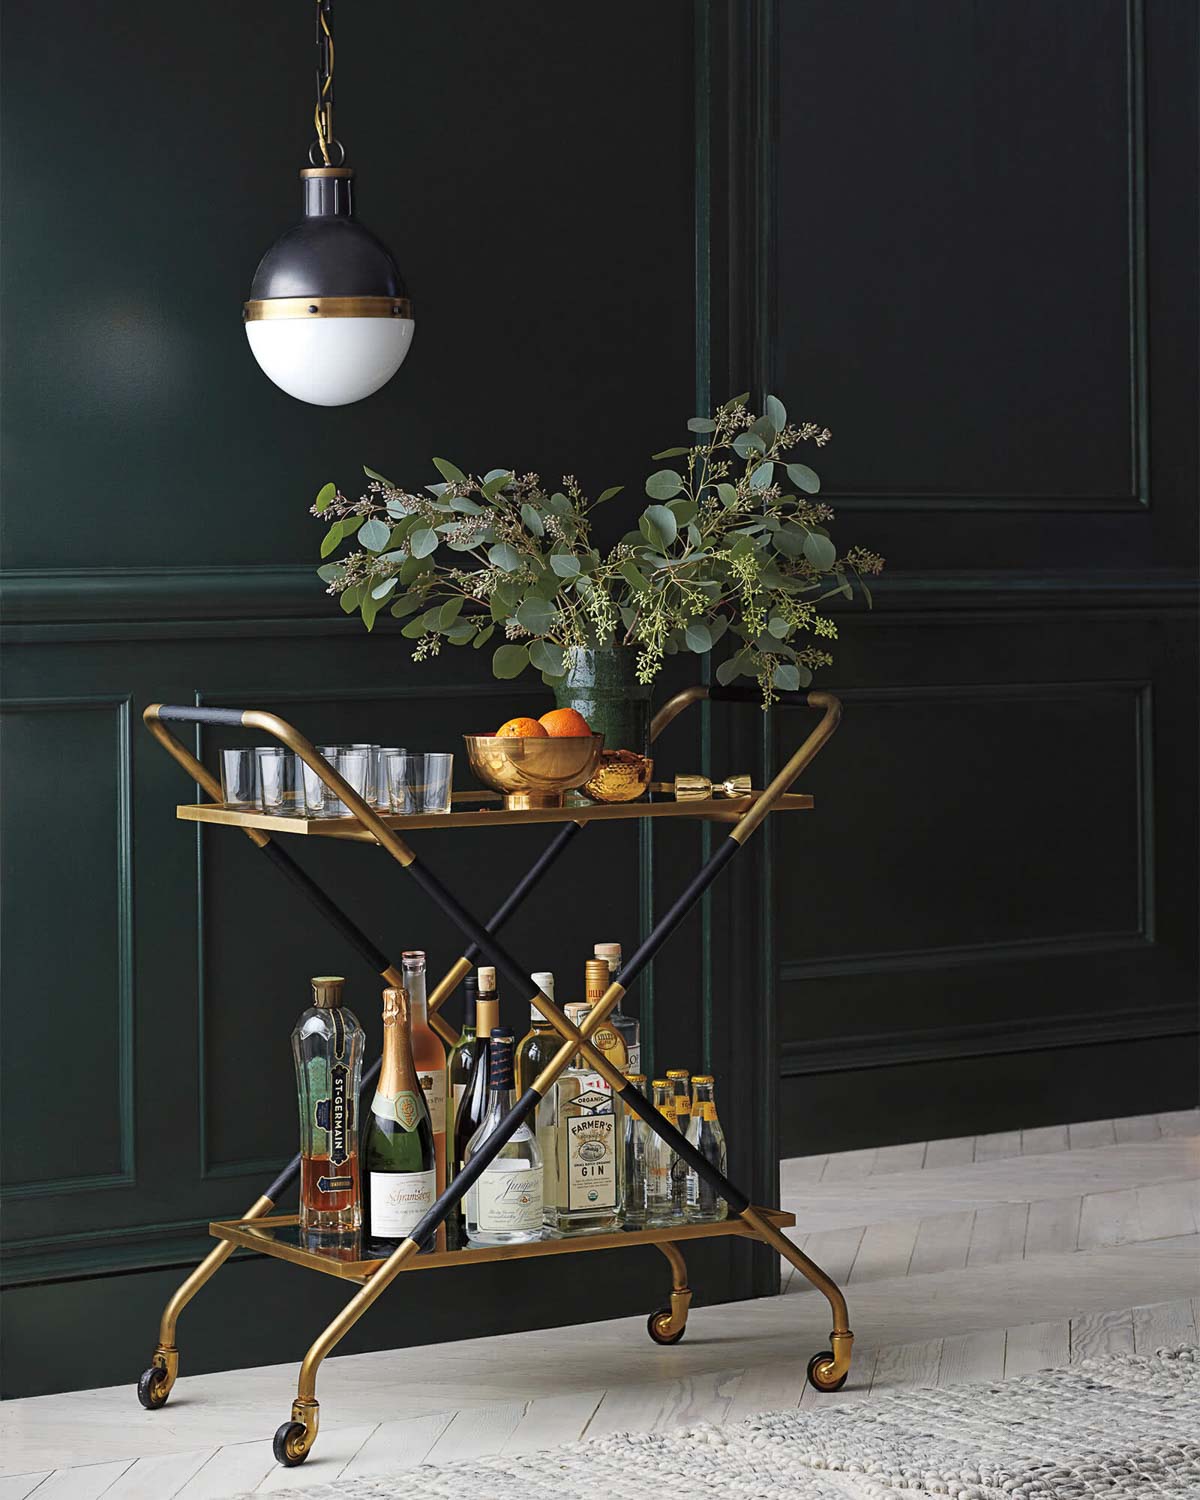 Bar cart in dining room - a great decor piece!